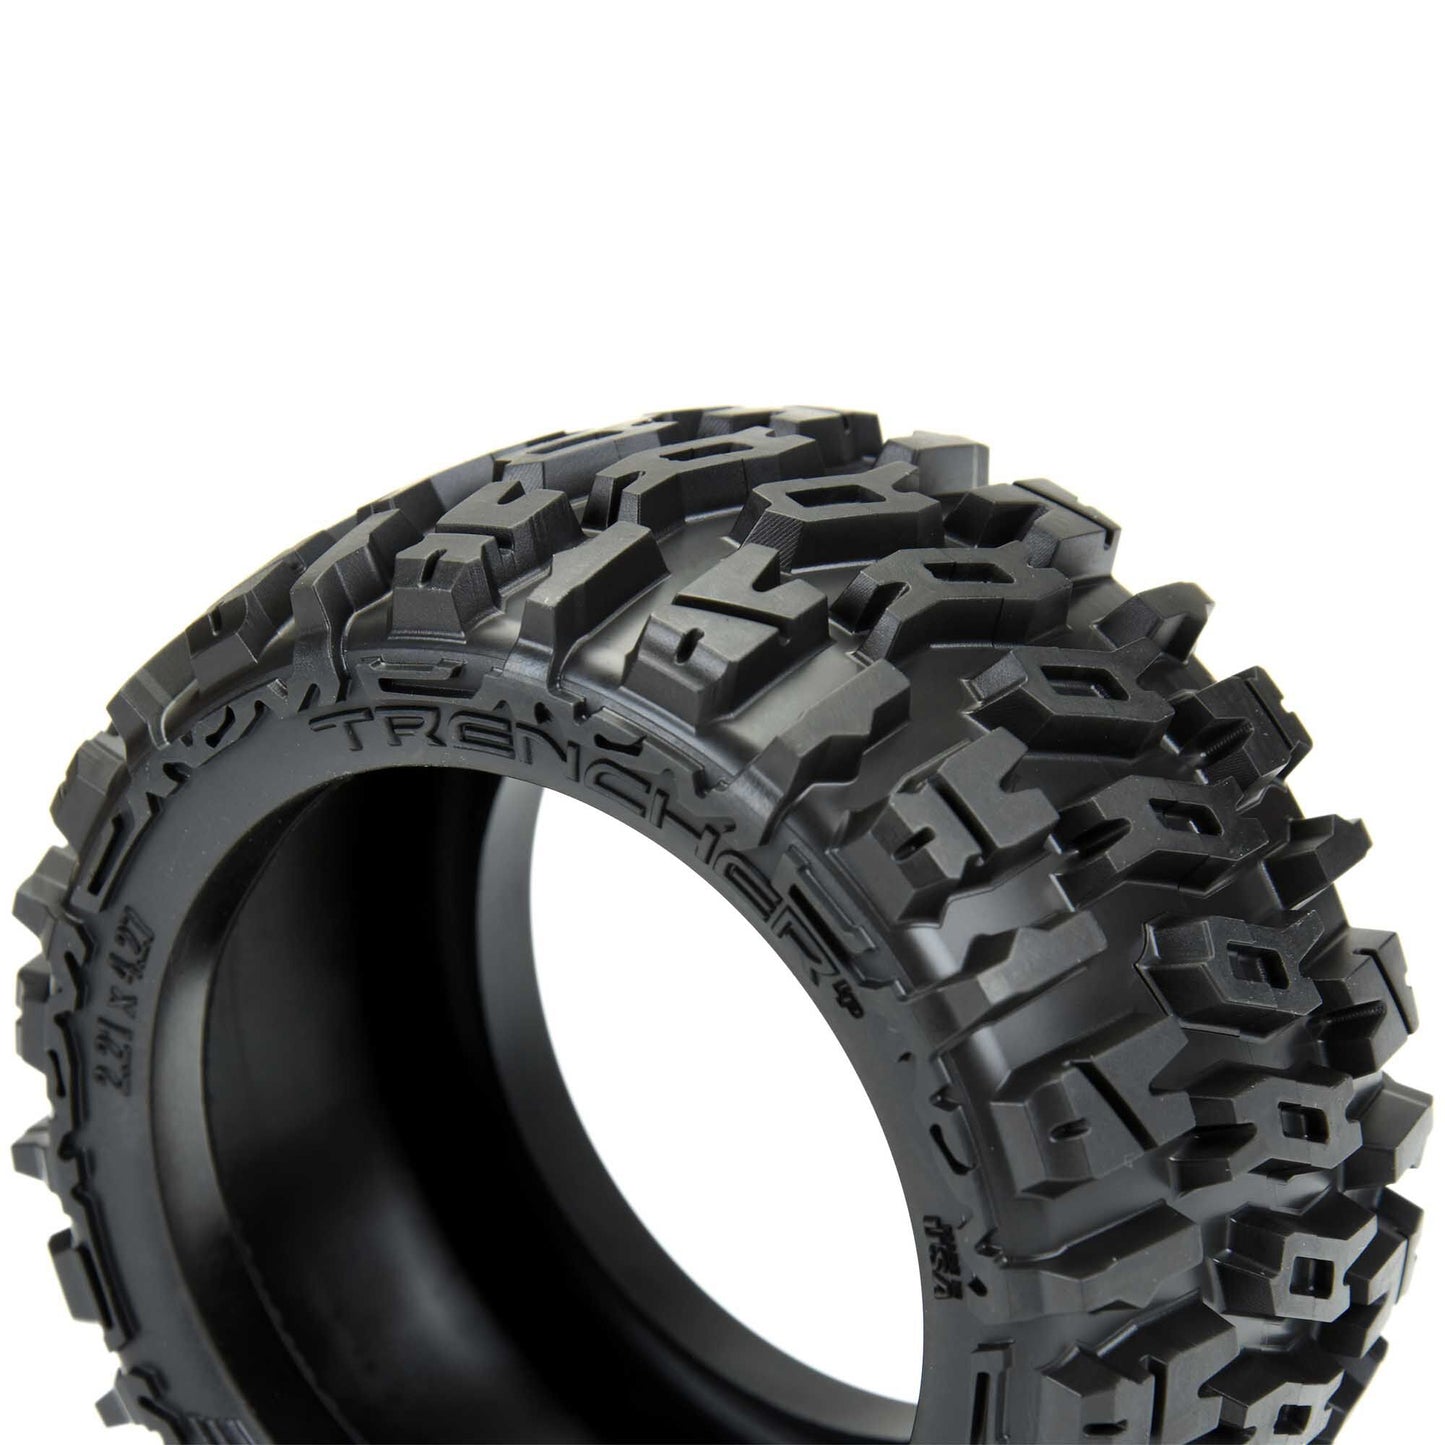 1/10 Pro-Line Trencher LP Front/Rear 2.8" MT Tires Mounted 12mm Blk Raid (2)